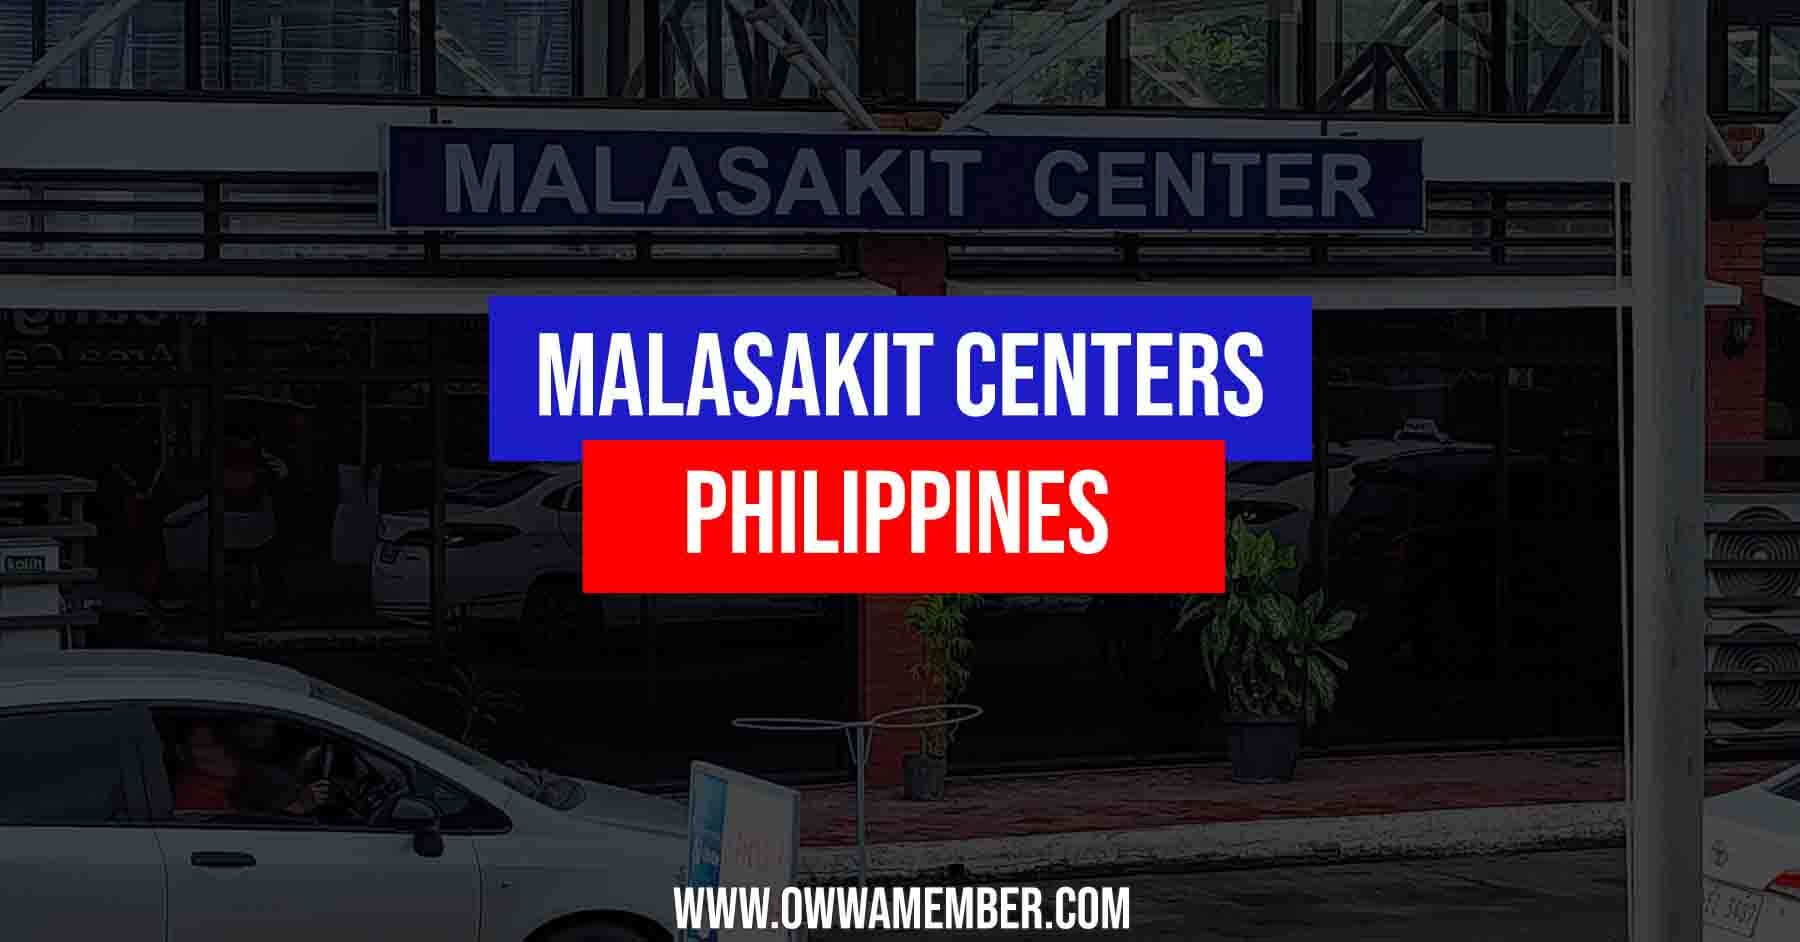 malasakit center branches in the philippines